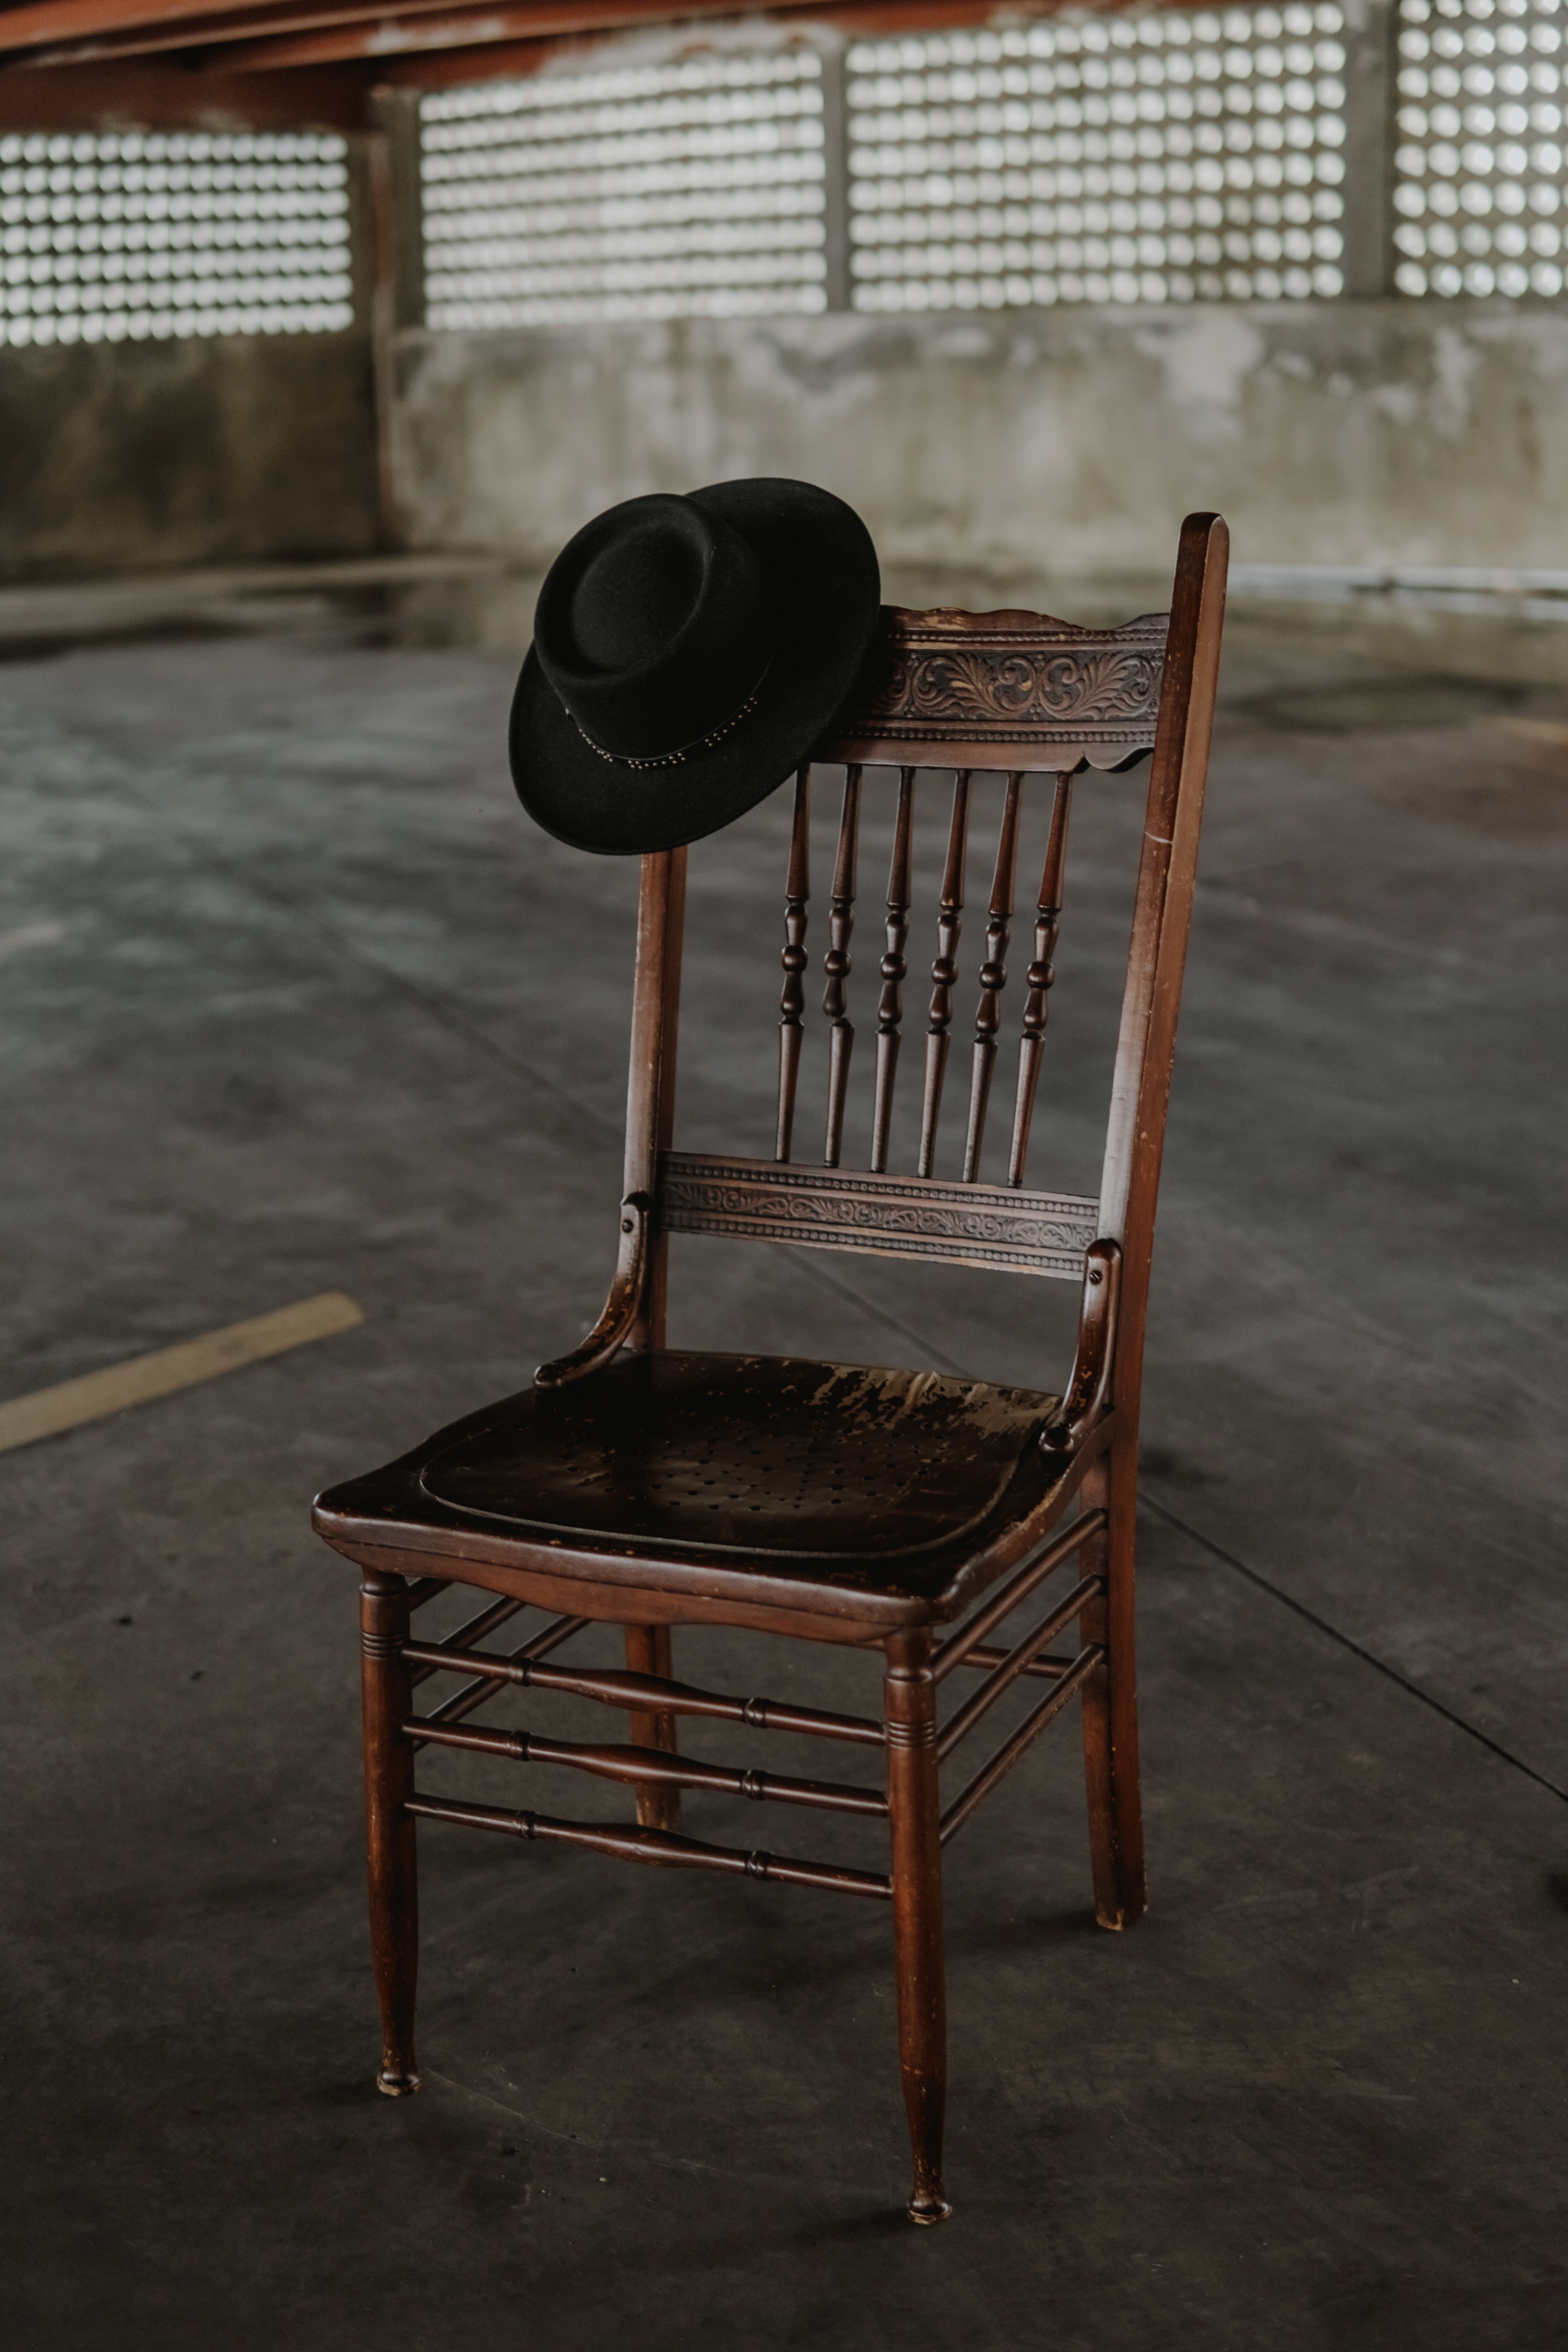 android furniture, miscellanea, building, miscellaneous, chair, hat